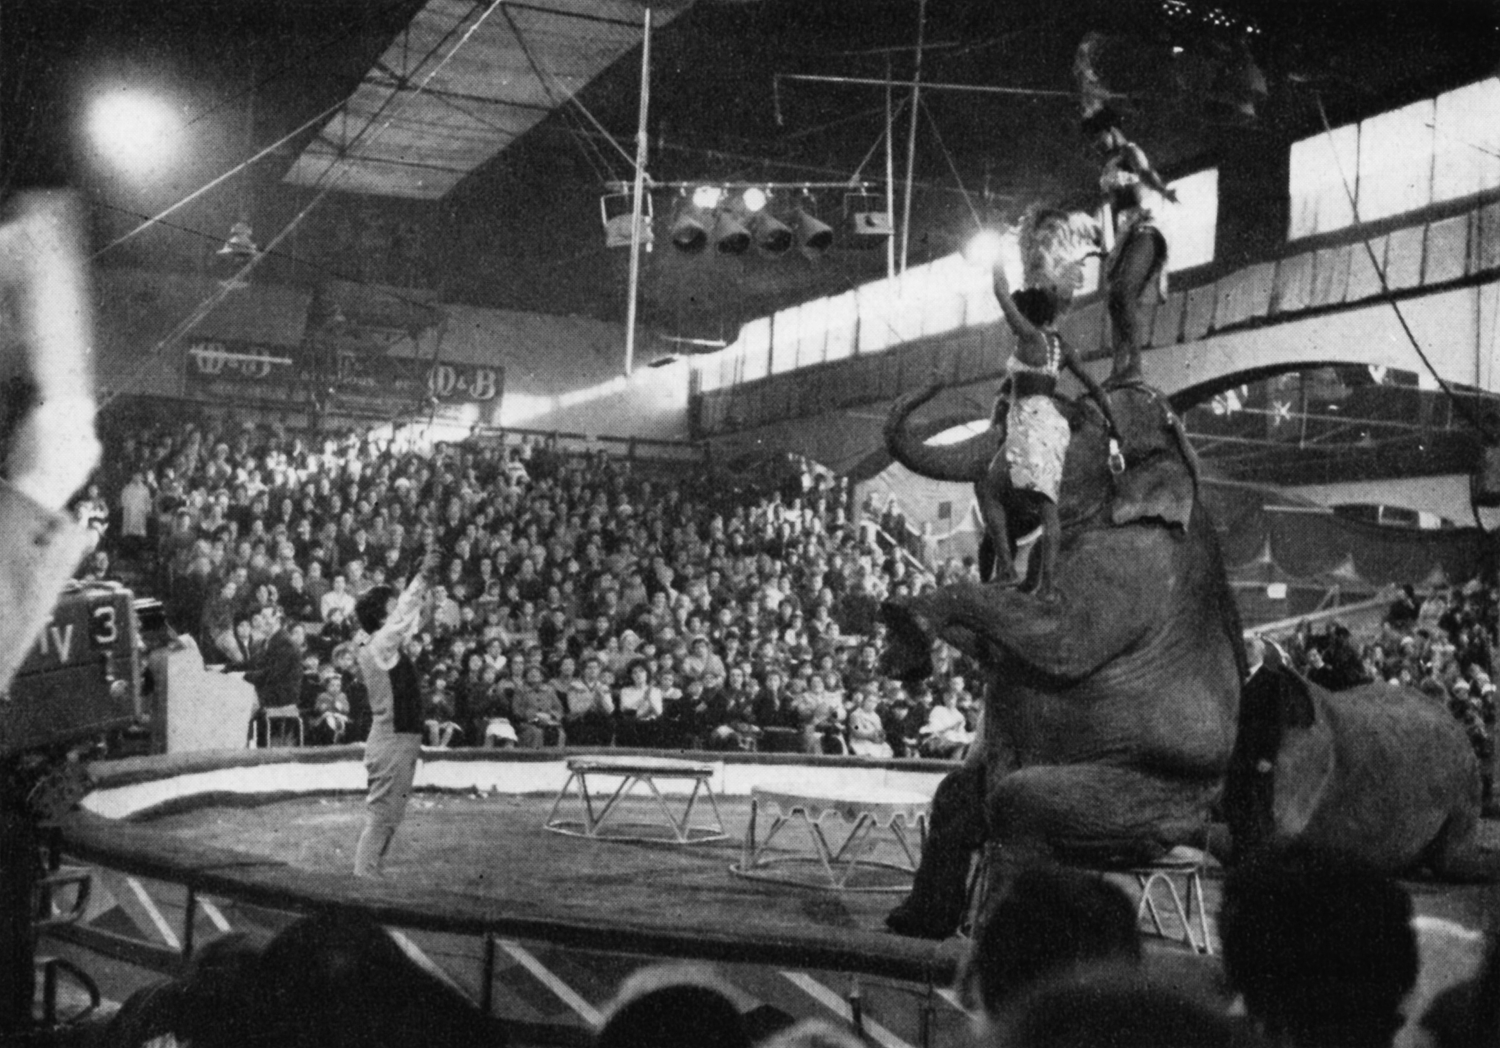 LUNCH BOX. Noele Gordon at the Circus, one of the outside broadcasts in the popular Midland series. ATV